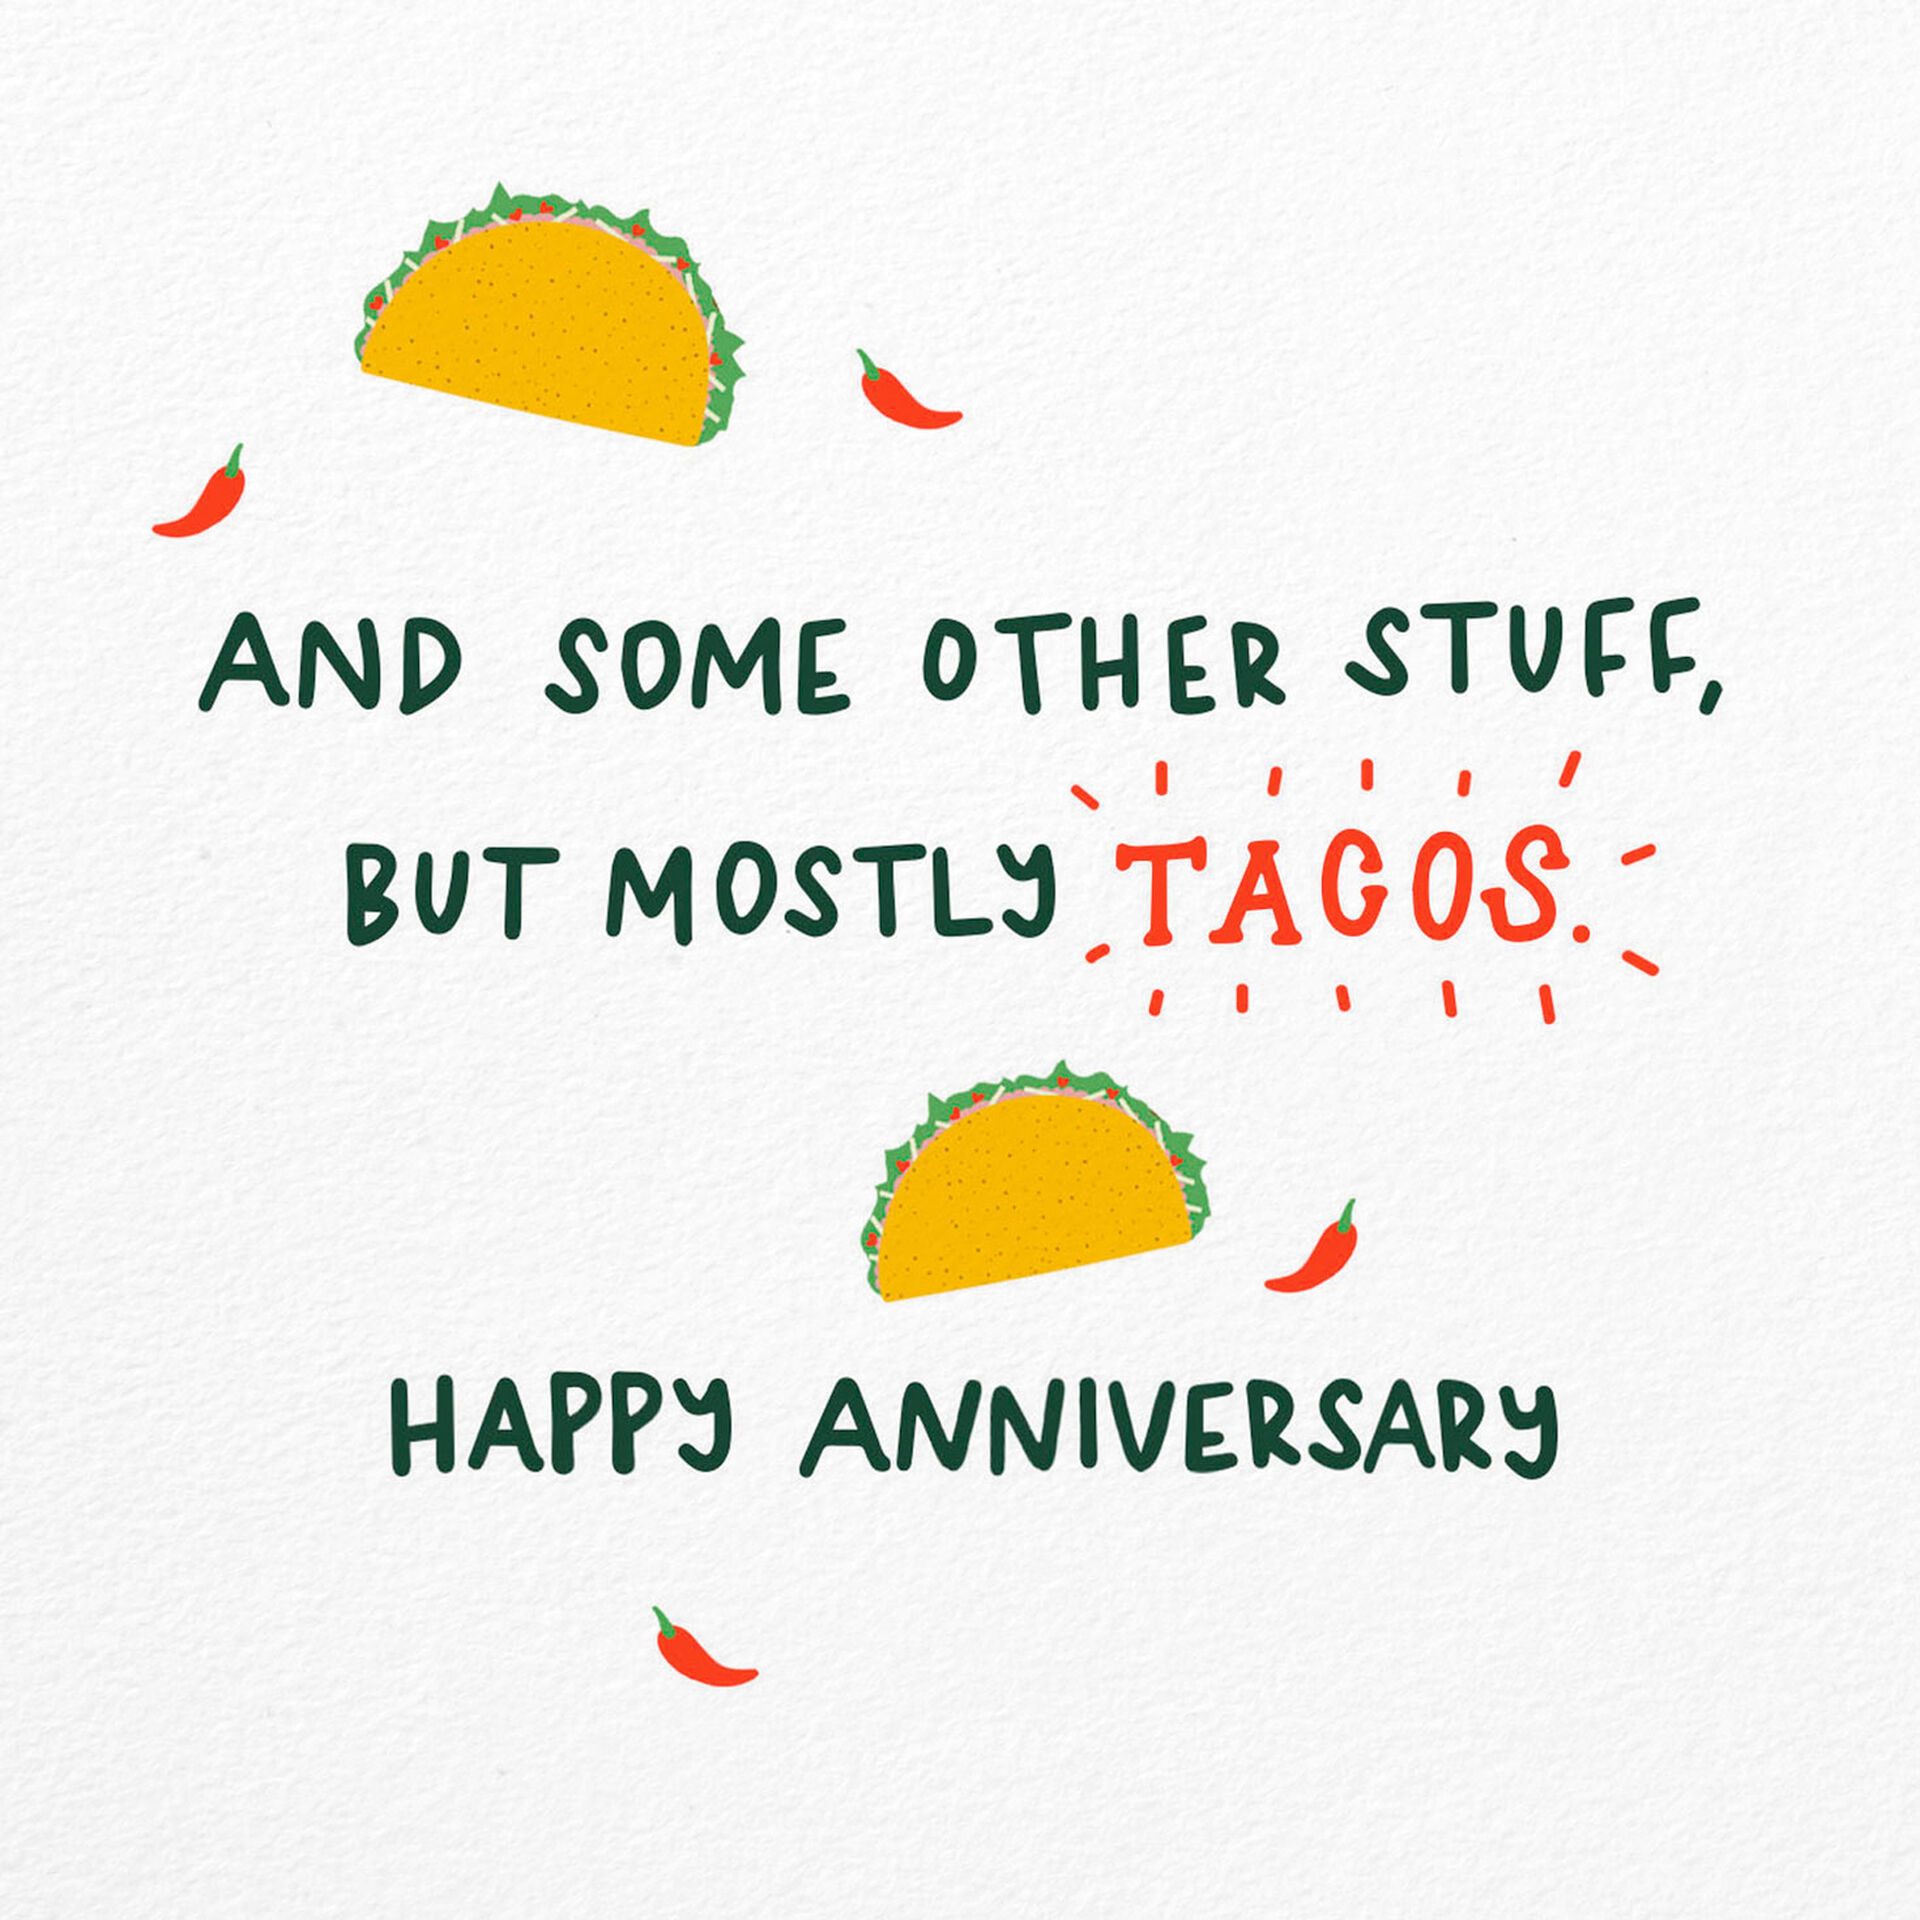 Tacos-and-Hot-Sauce-Anniversary-Card_299YYS1405_02